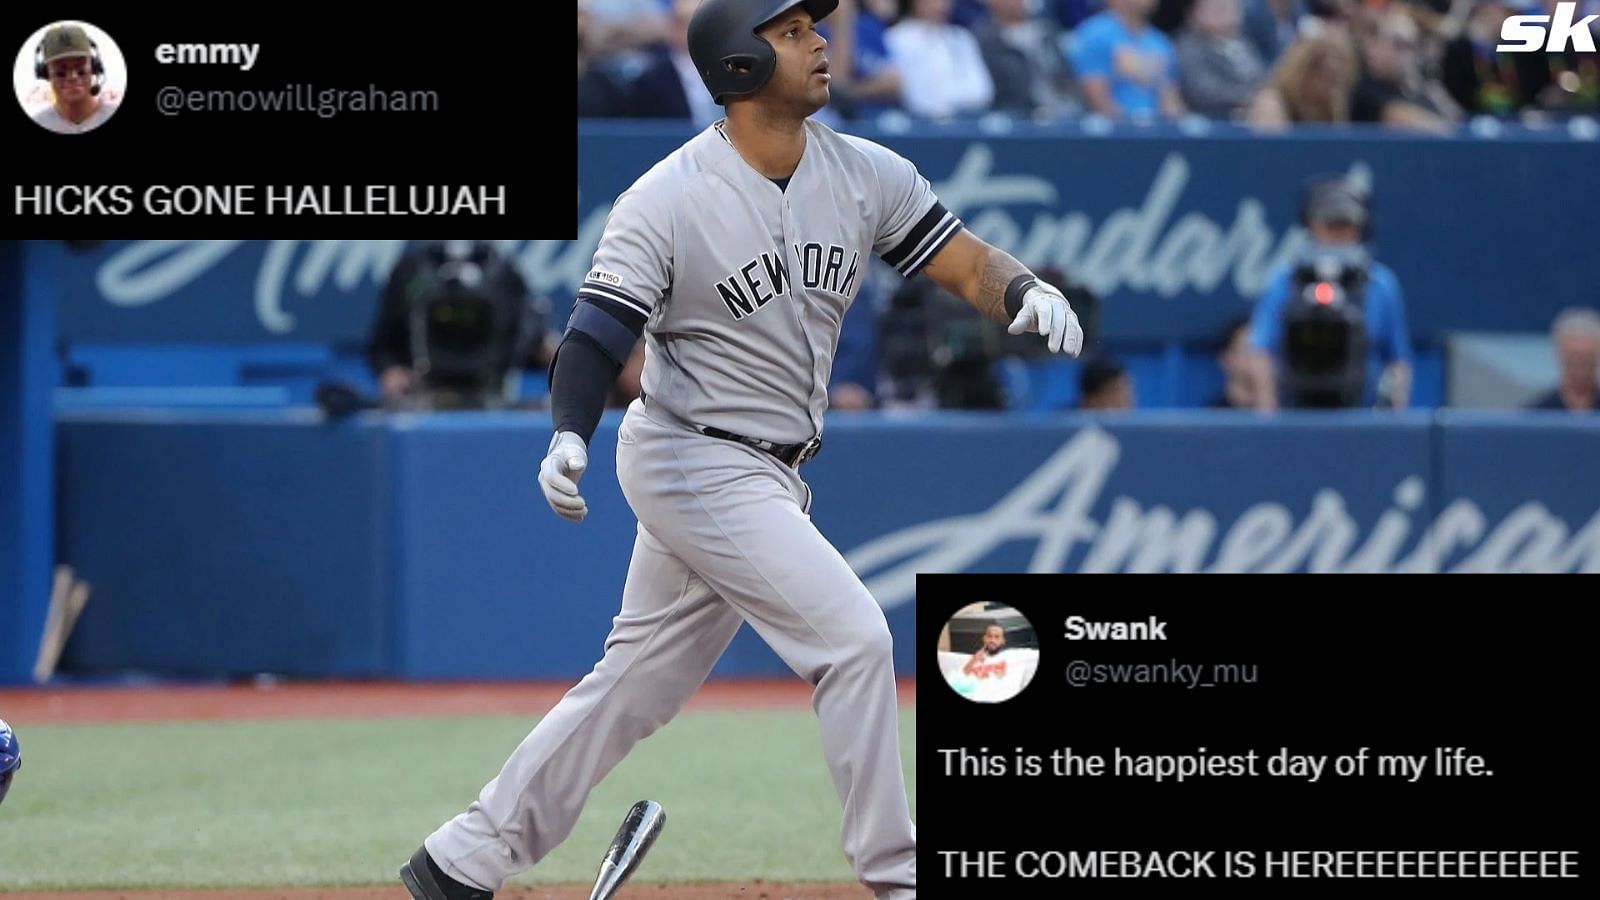 The New York Yankees have officially released OF Aaron Hicks